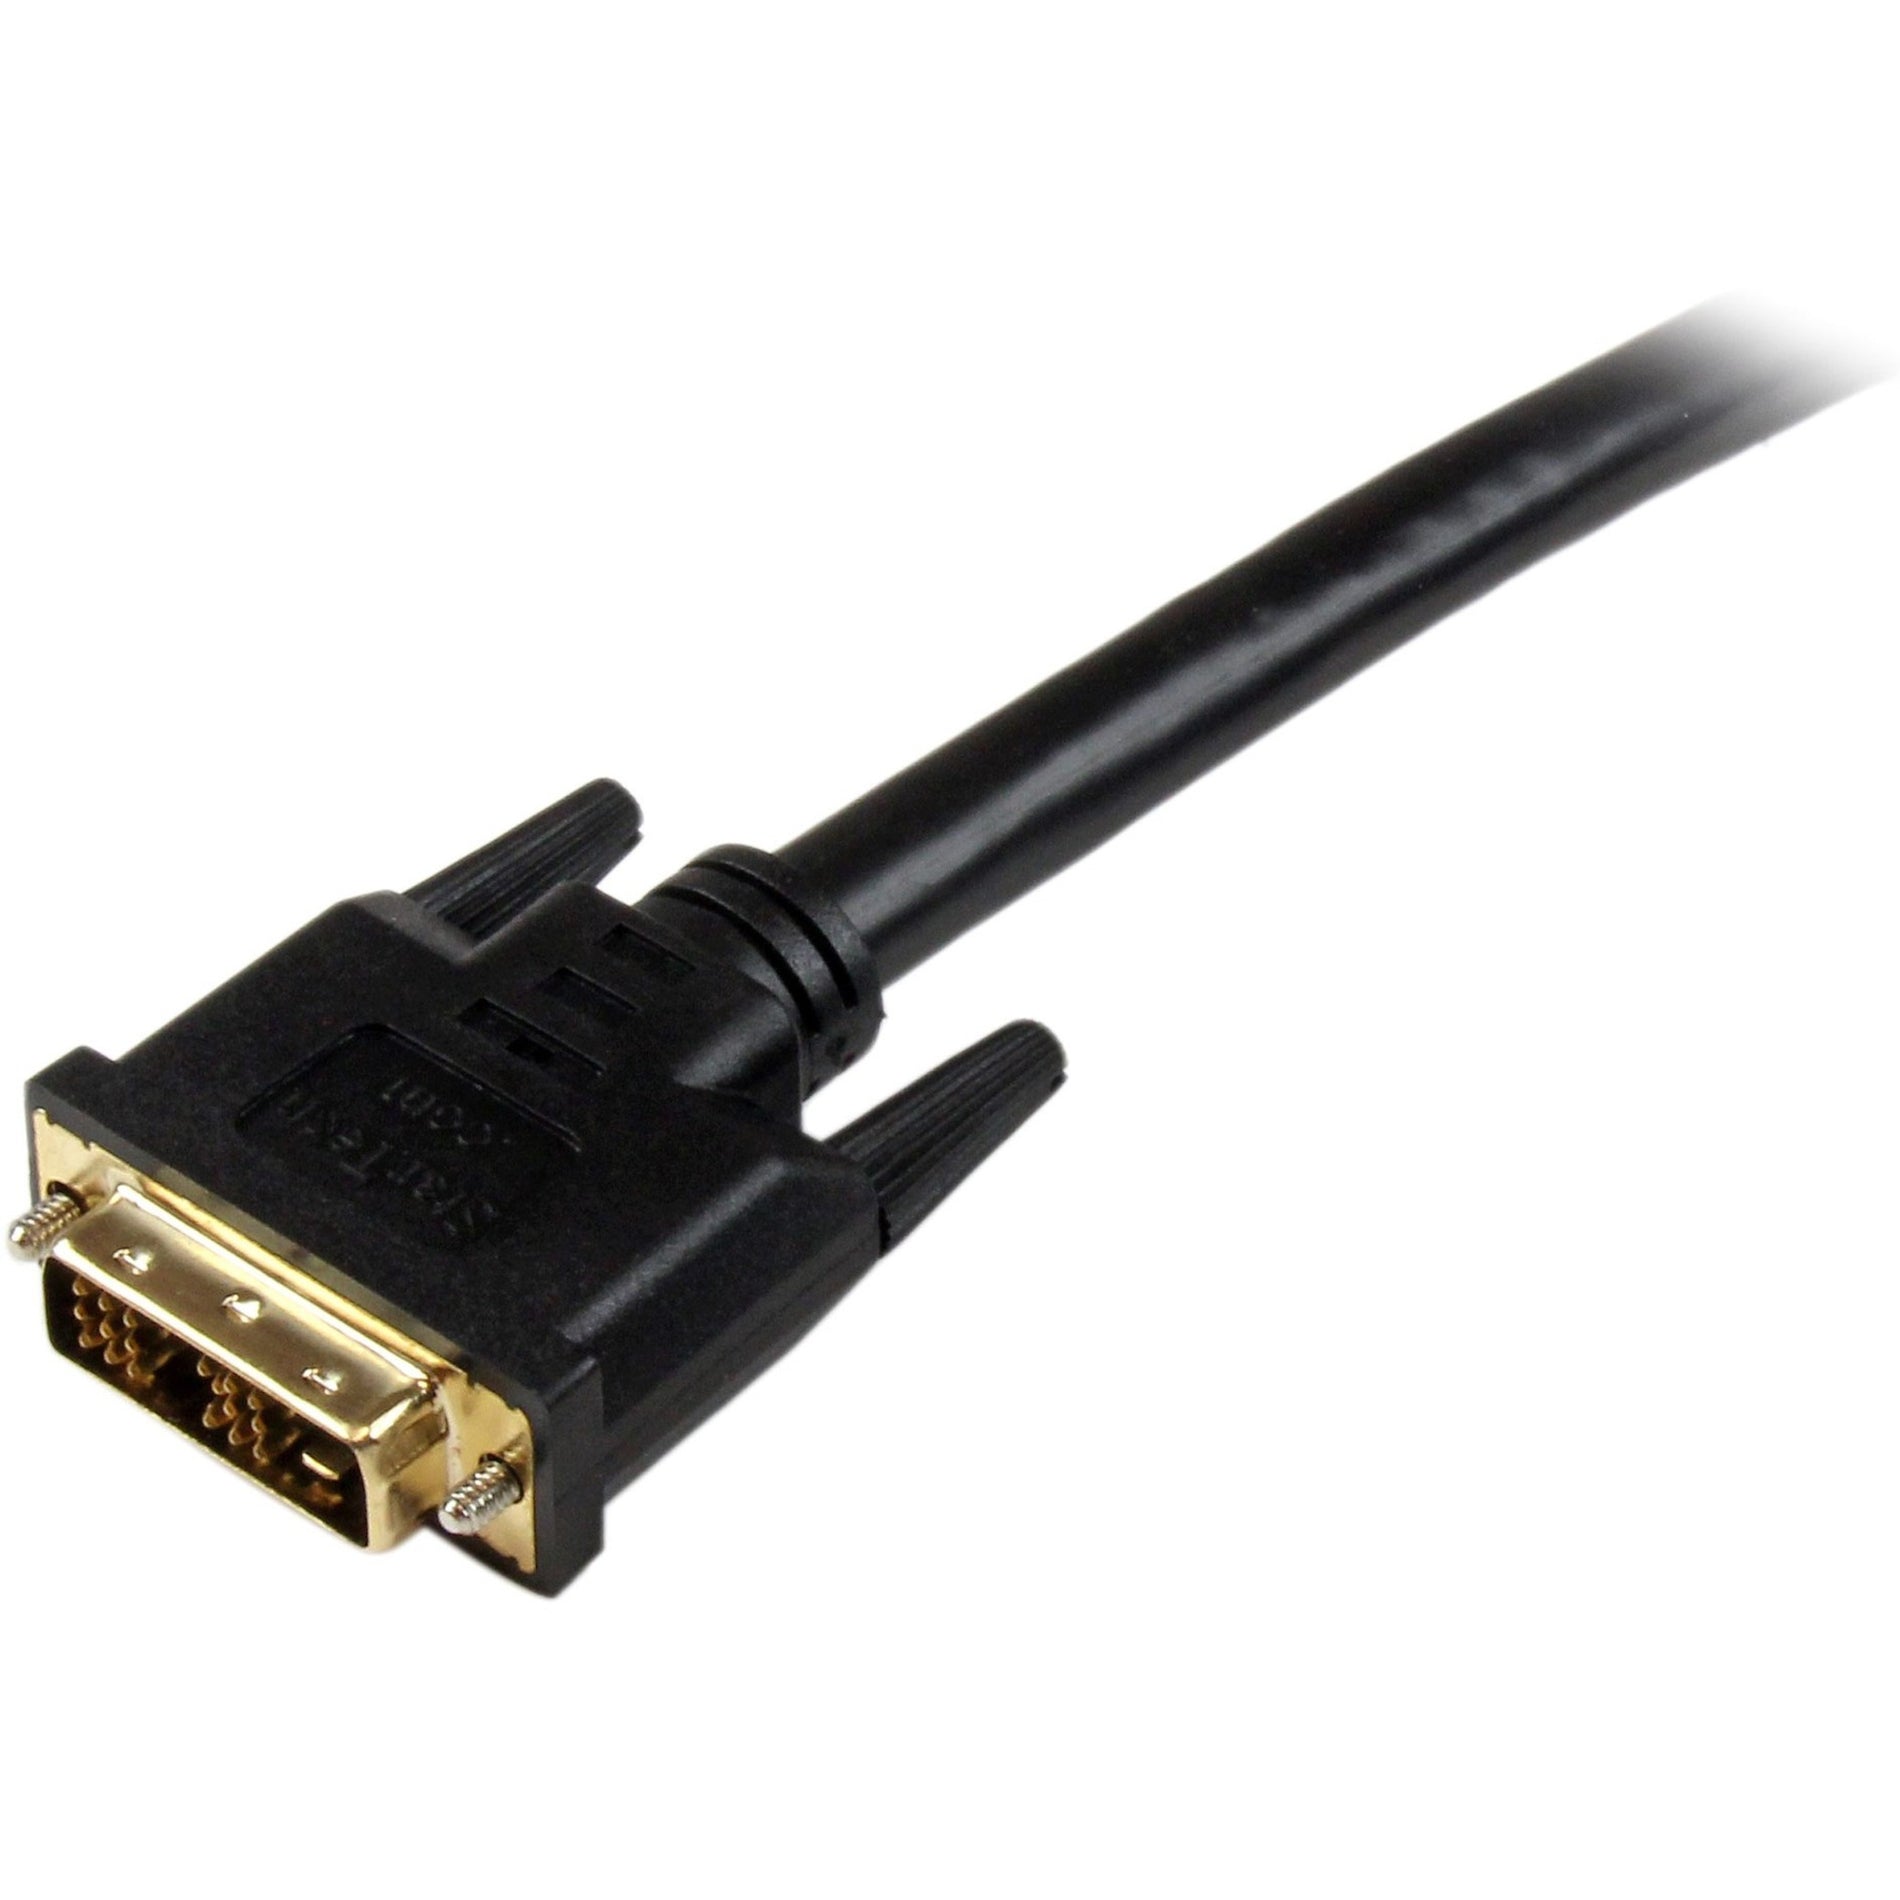 StarTech.com HDMIDVIMM20 20 ft HDMI to DVI-D Cable - M/M, Molded, Passive, Strain Relief, Copper Conductor, Shielding, 24 AWG, Nickel Plating, Black